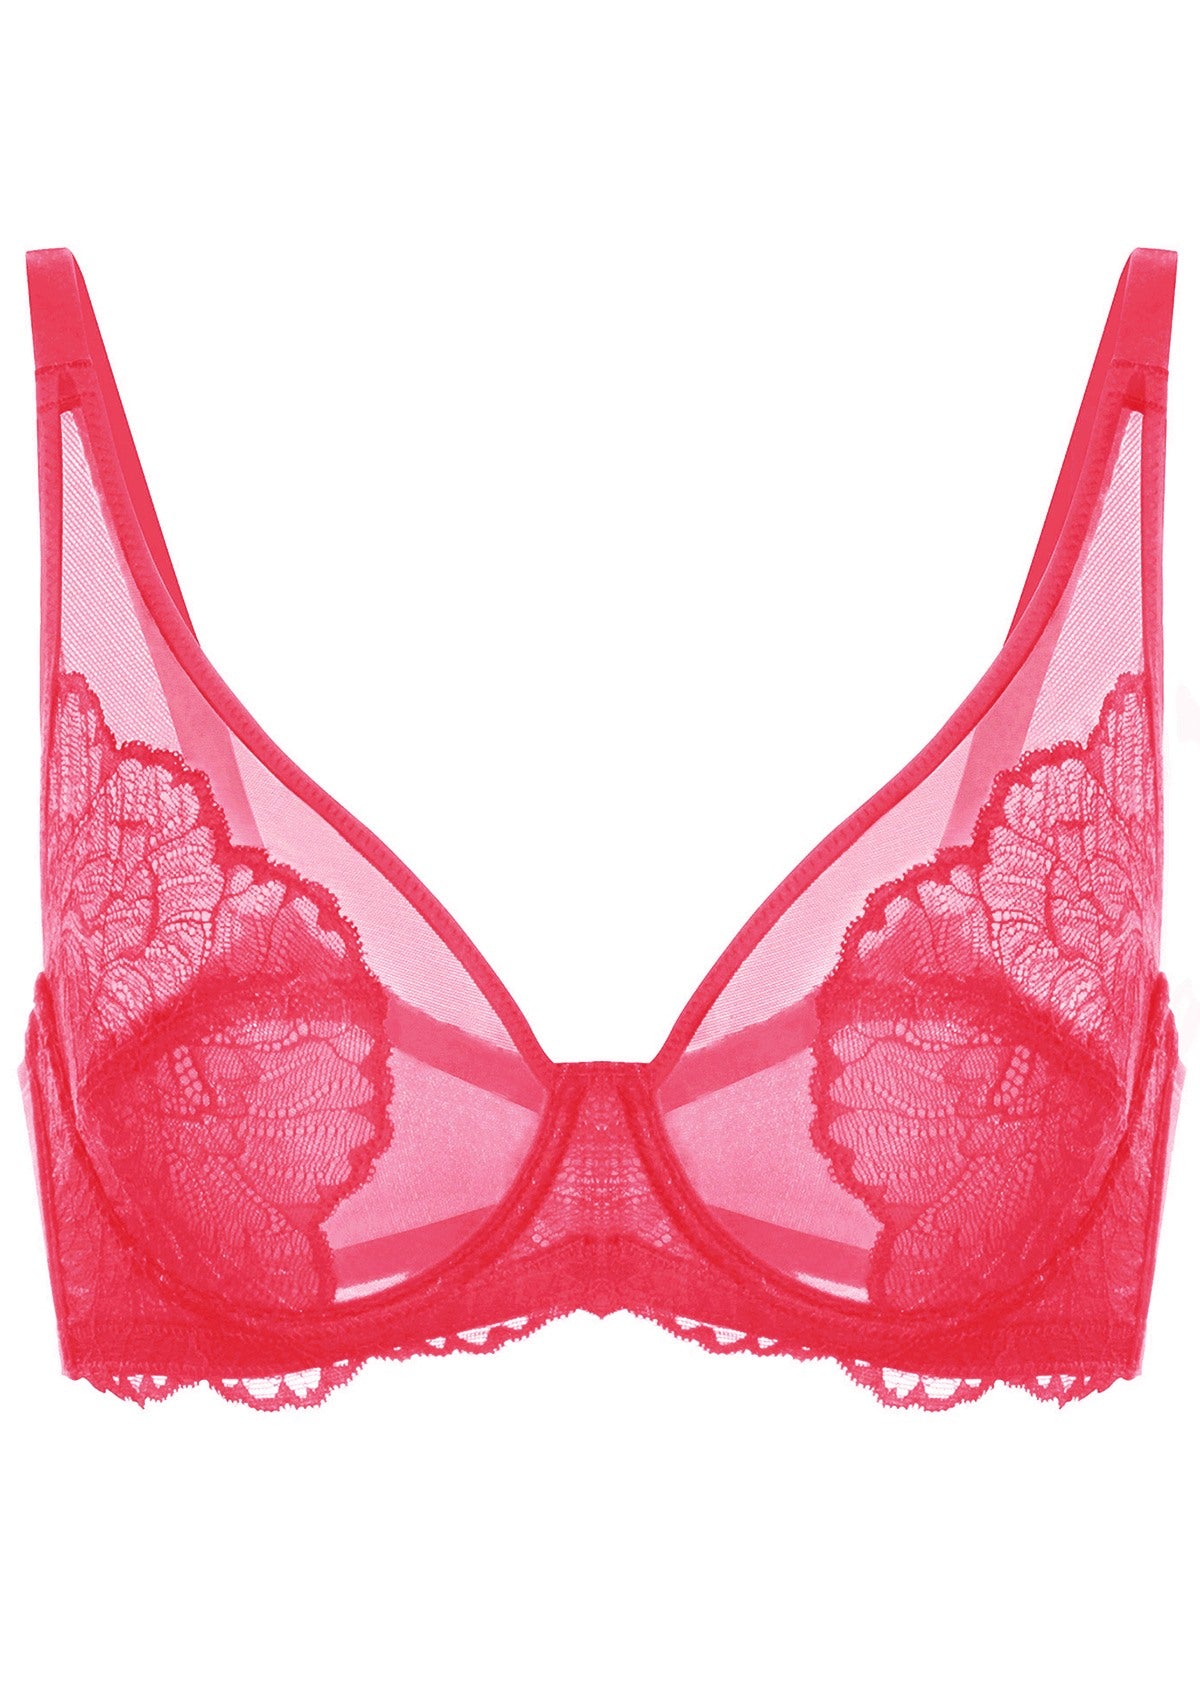 HSIA Blossom Unlined Lace Underwire Bra - Raspberry / 40 / D